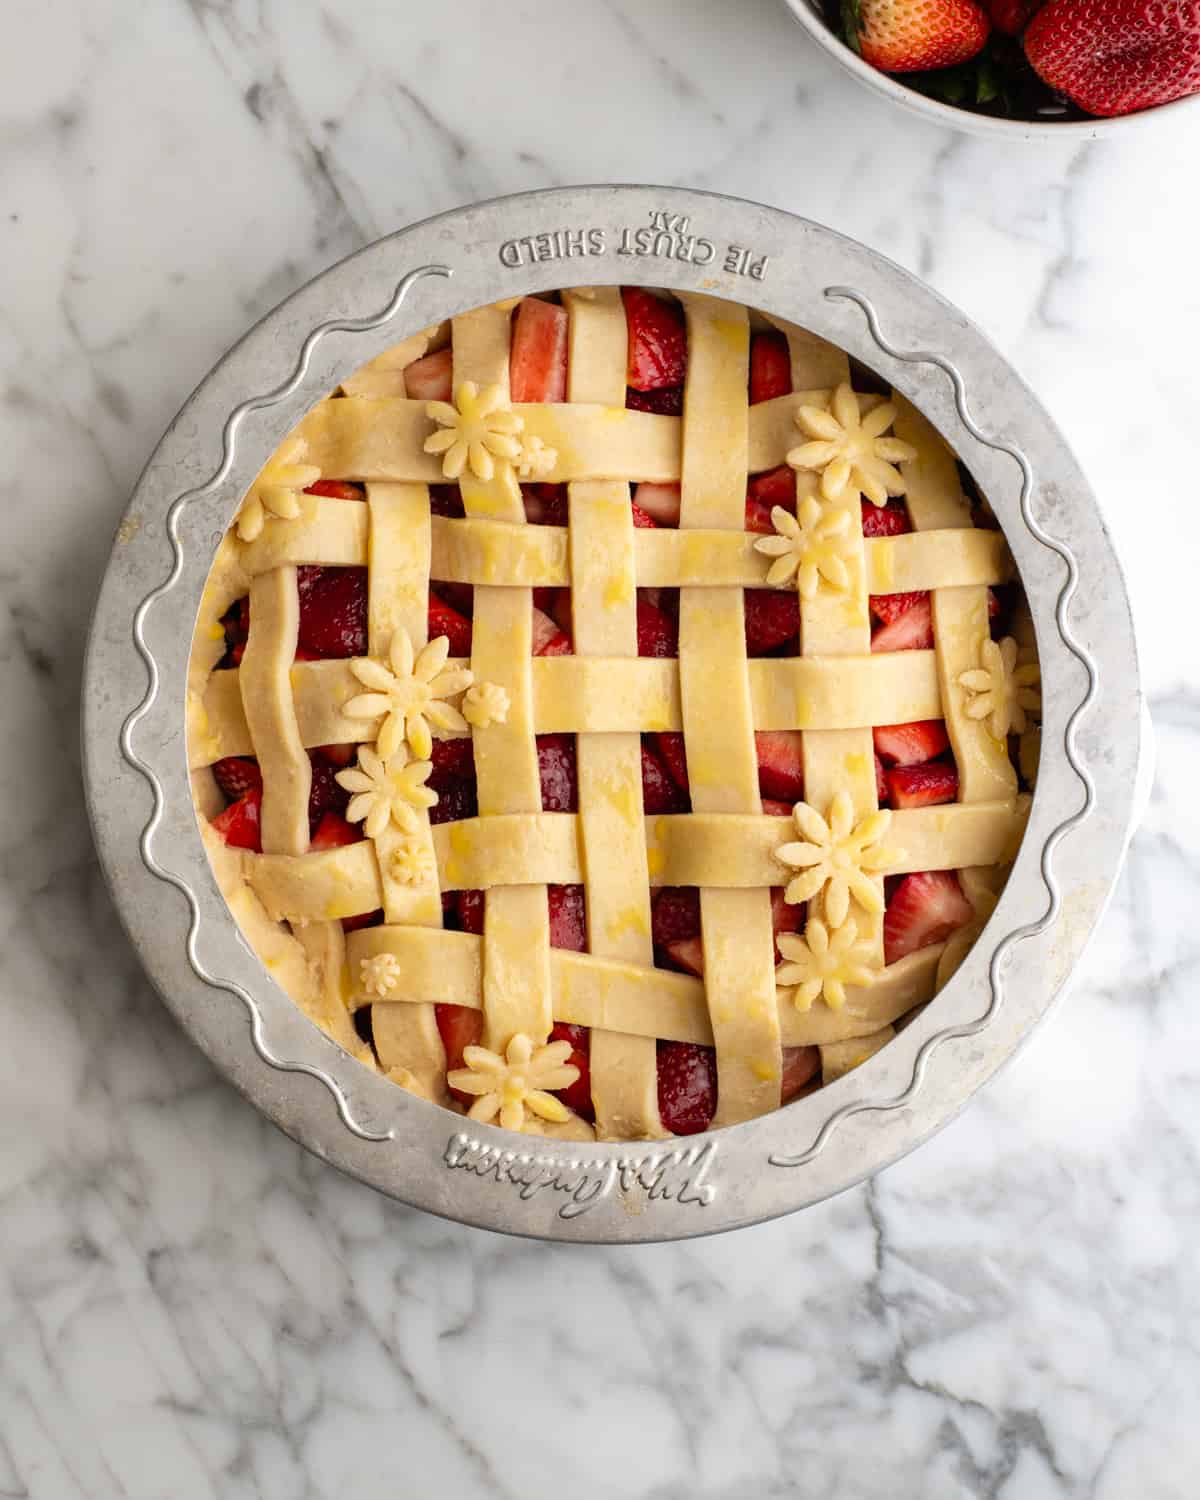 assembled strawberry pie with a pie crust shield before baking